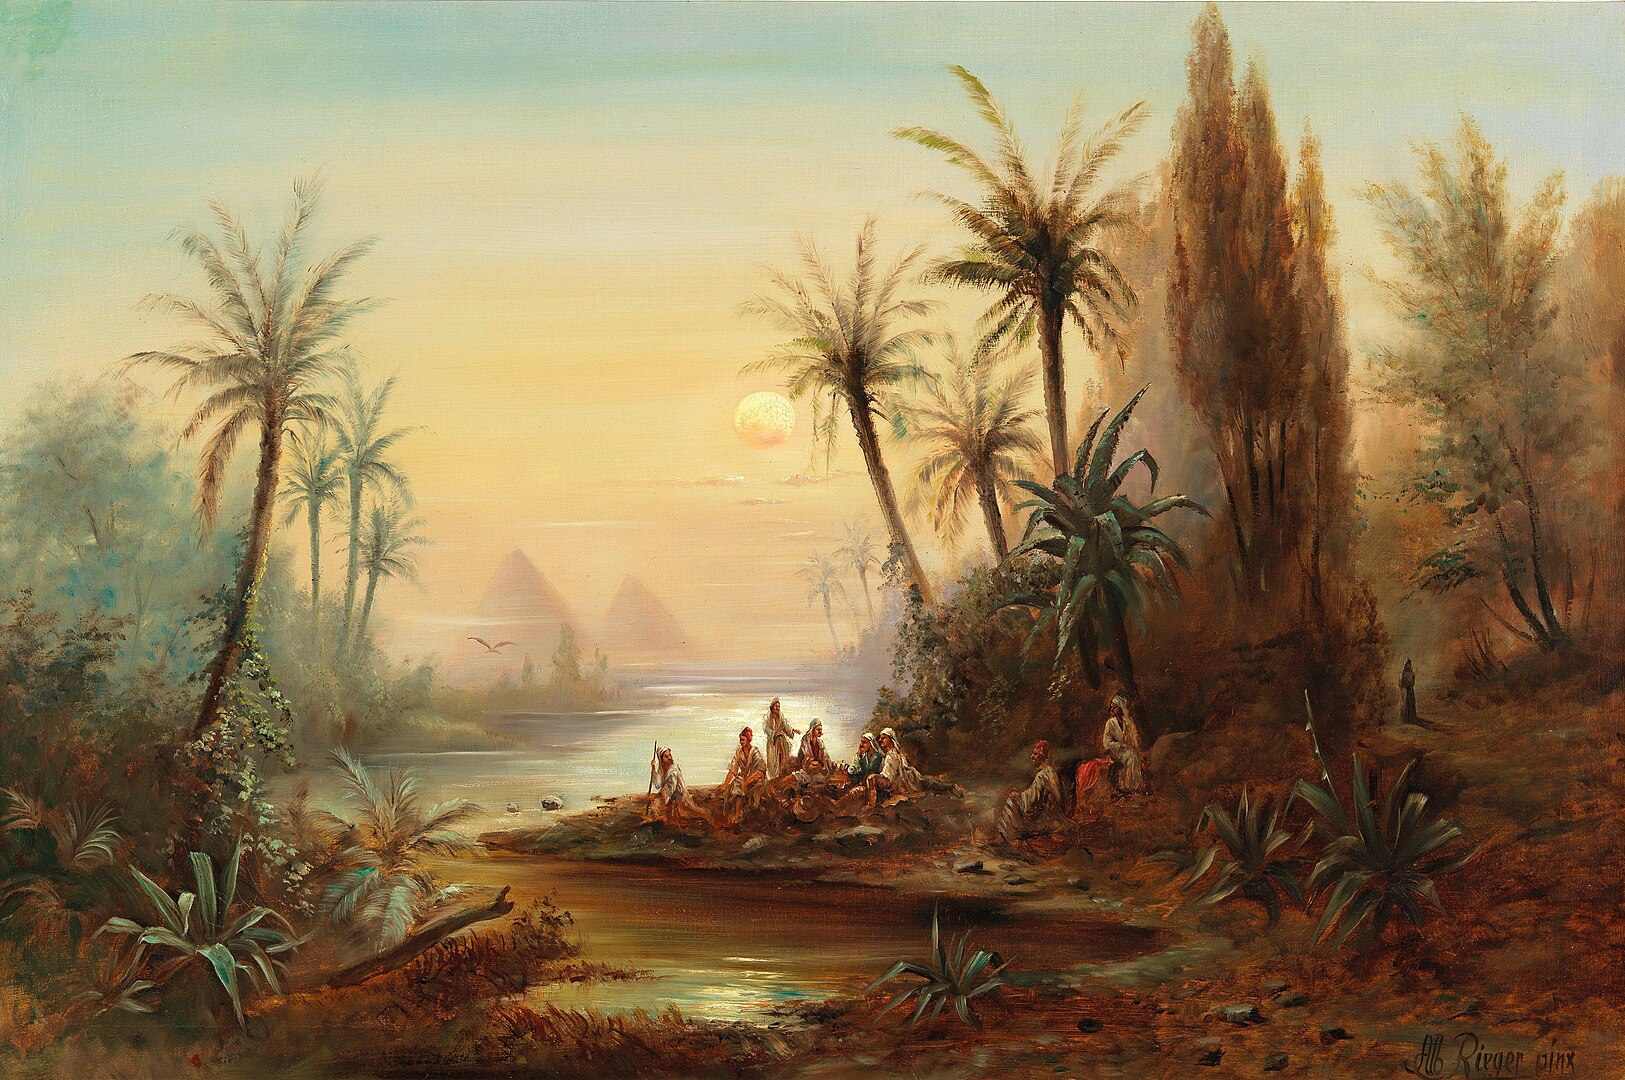 A landscape view of a river with palm trees at sunset